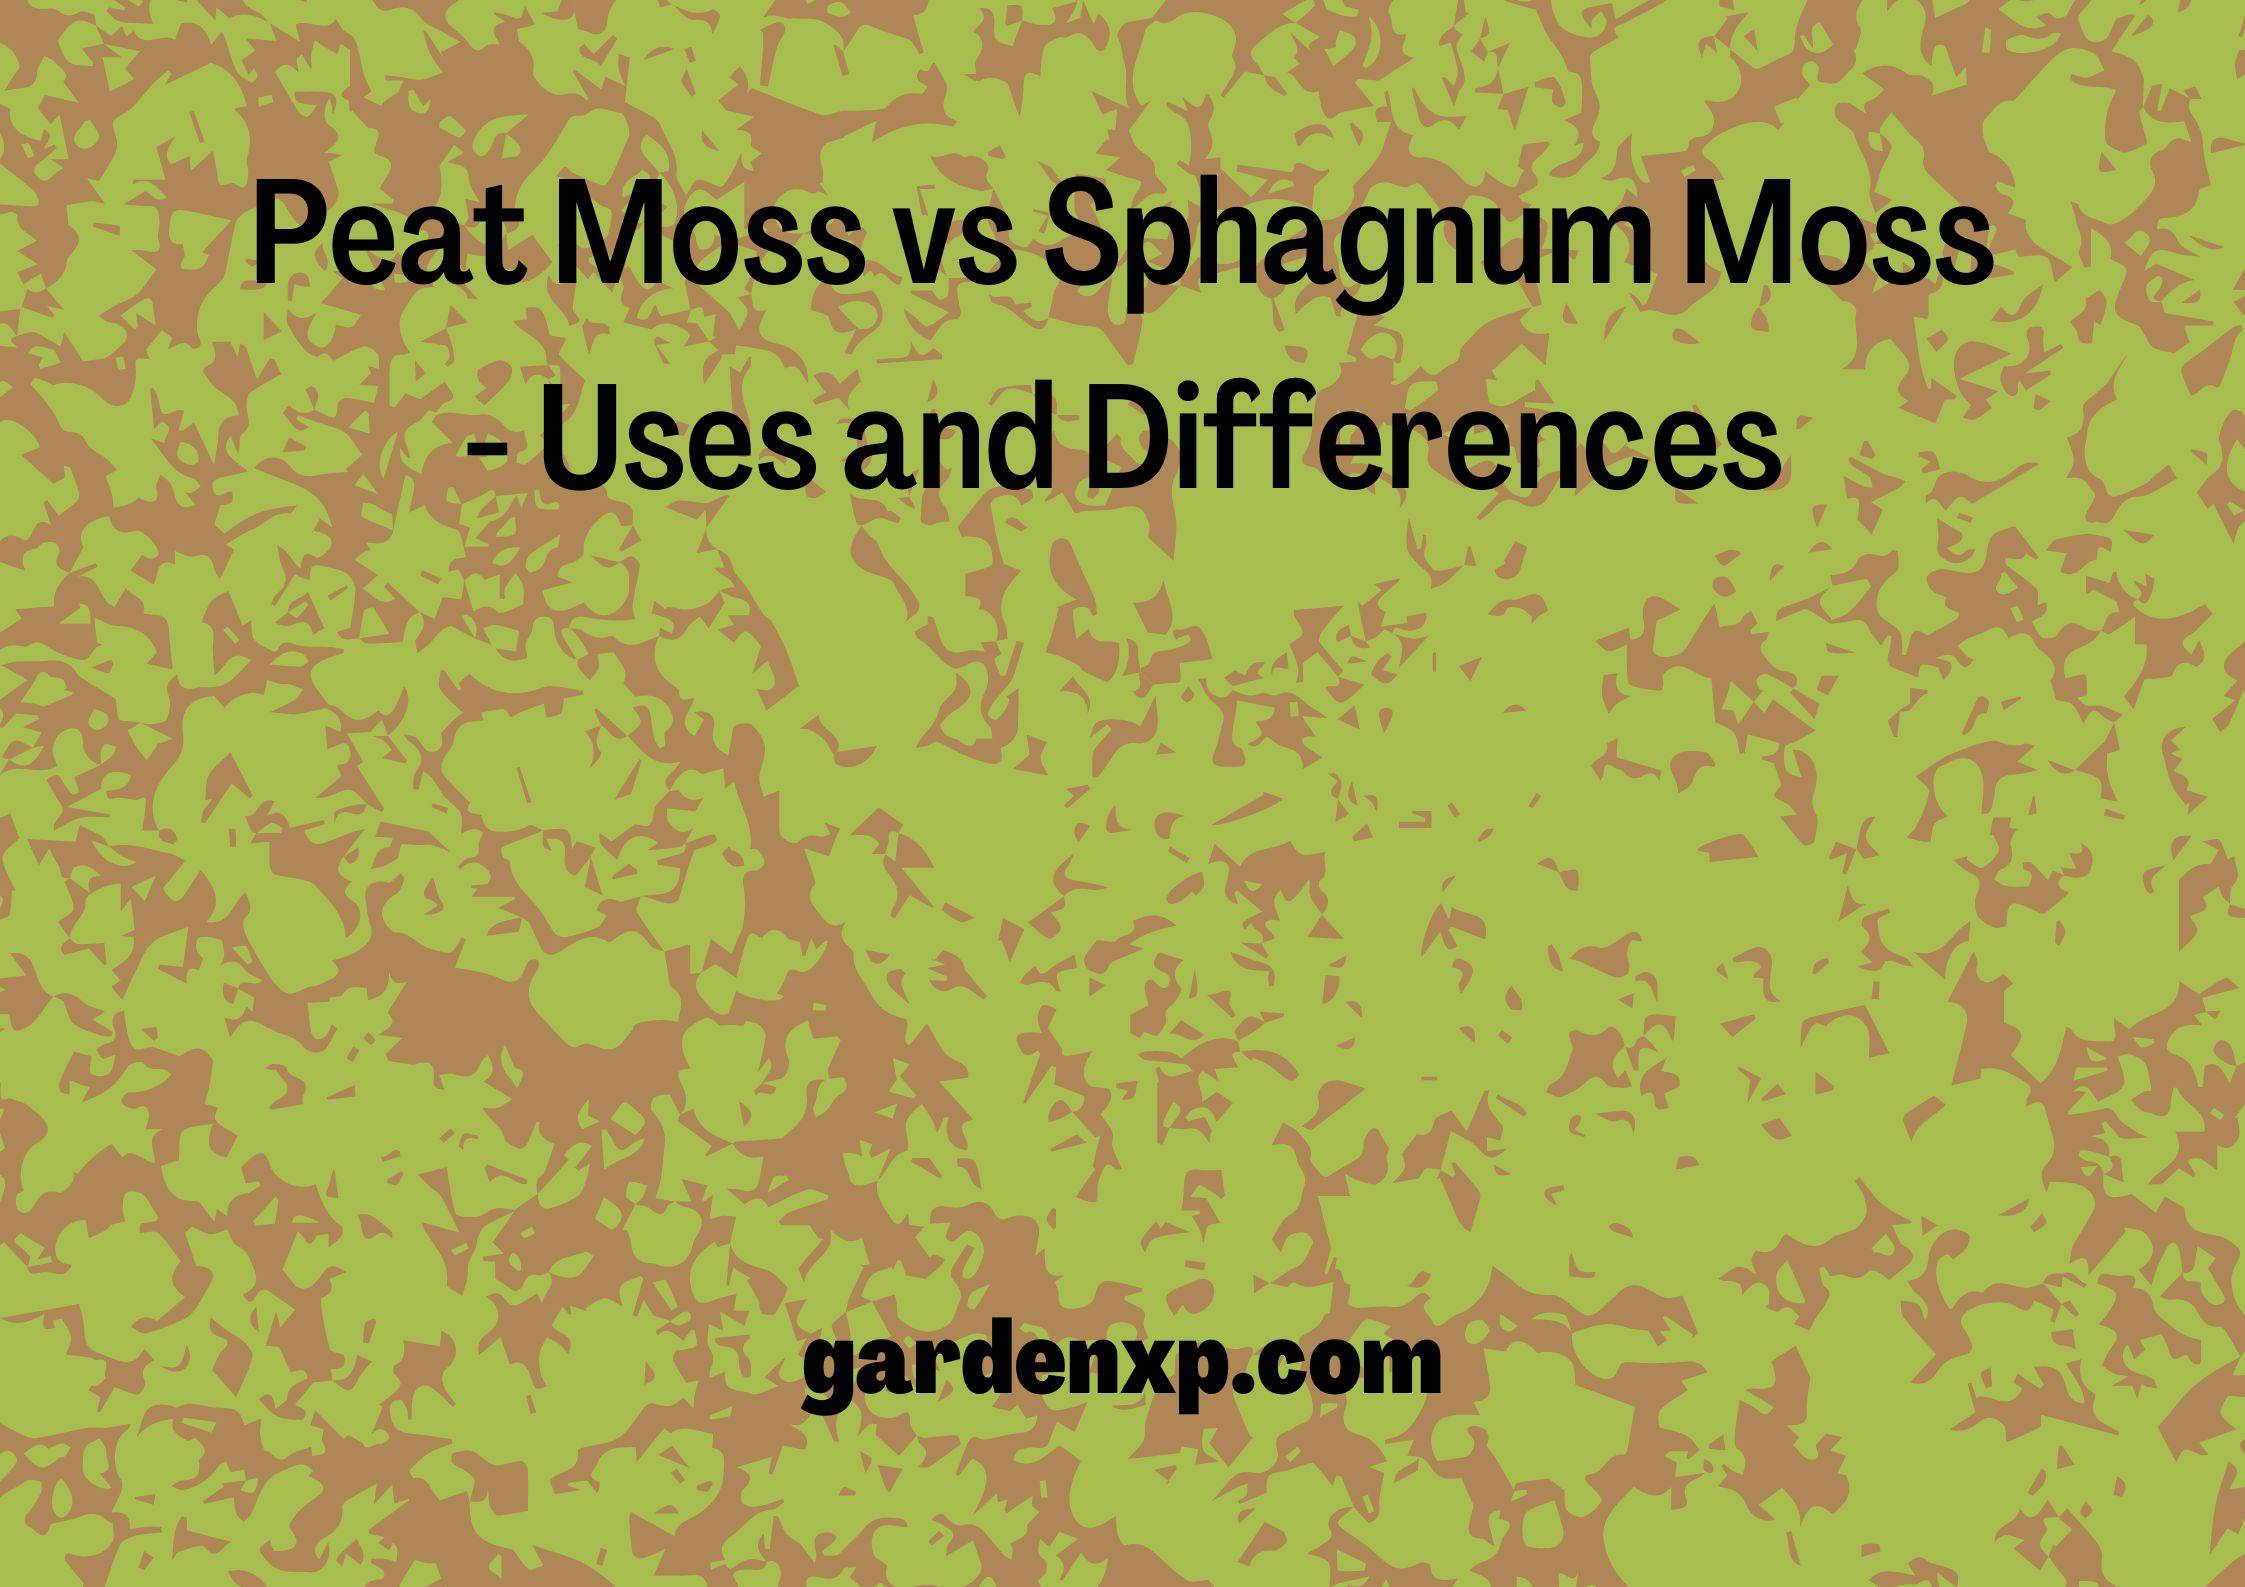 Peat Moss vs Sphagnum Moss - Uses and Differences